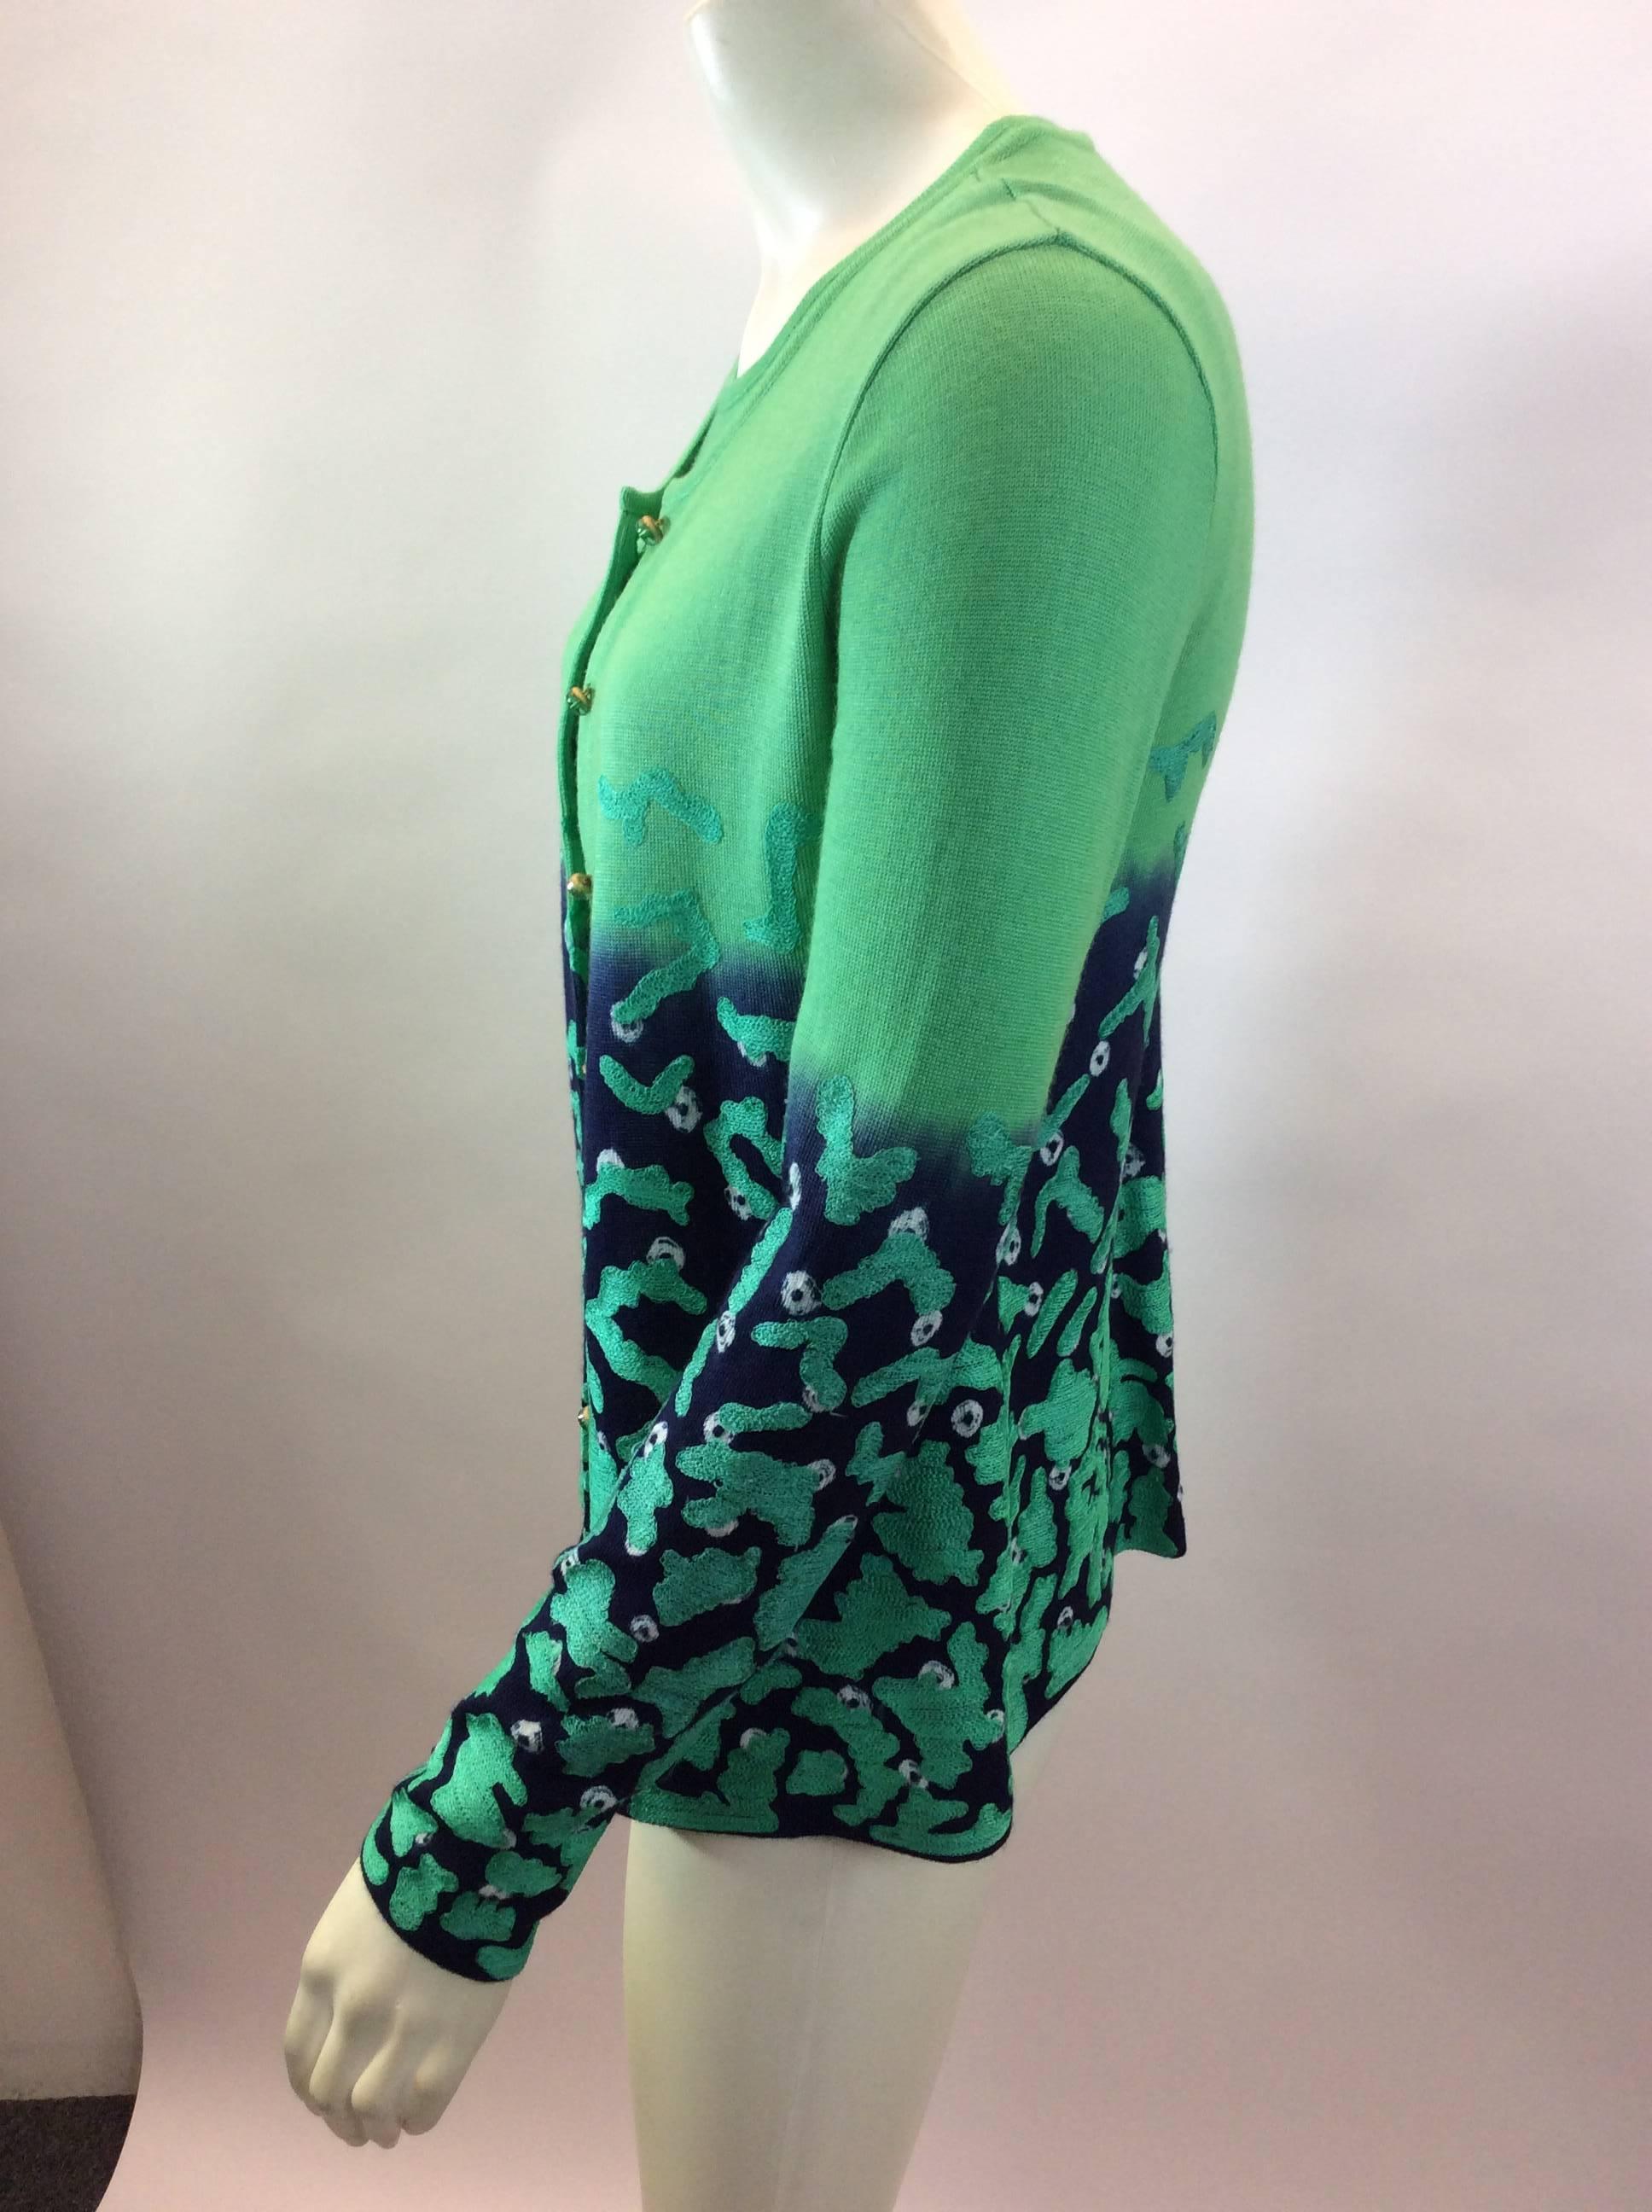 Oscar de la Renta Two Piece Green Sweater Set
Made in Italy
$199
Size Small
Blouse:
Length 21